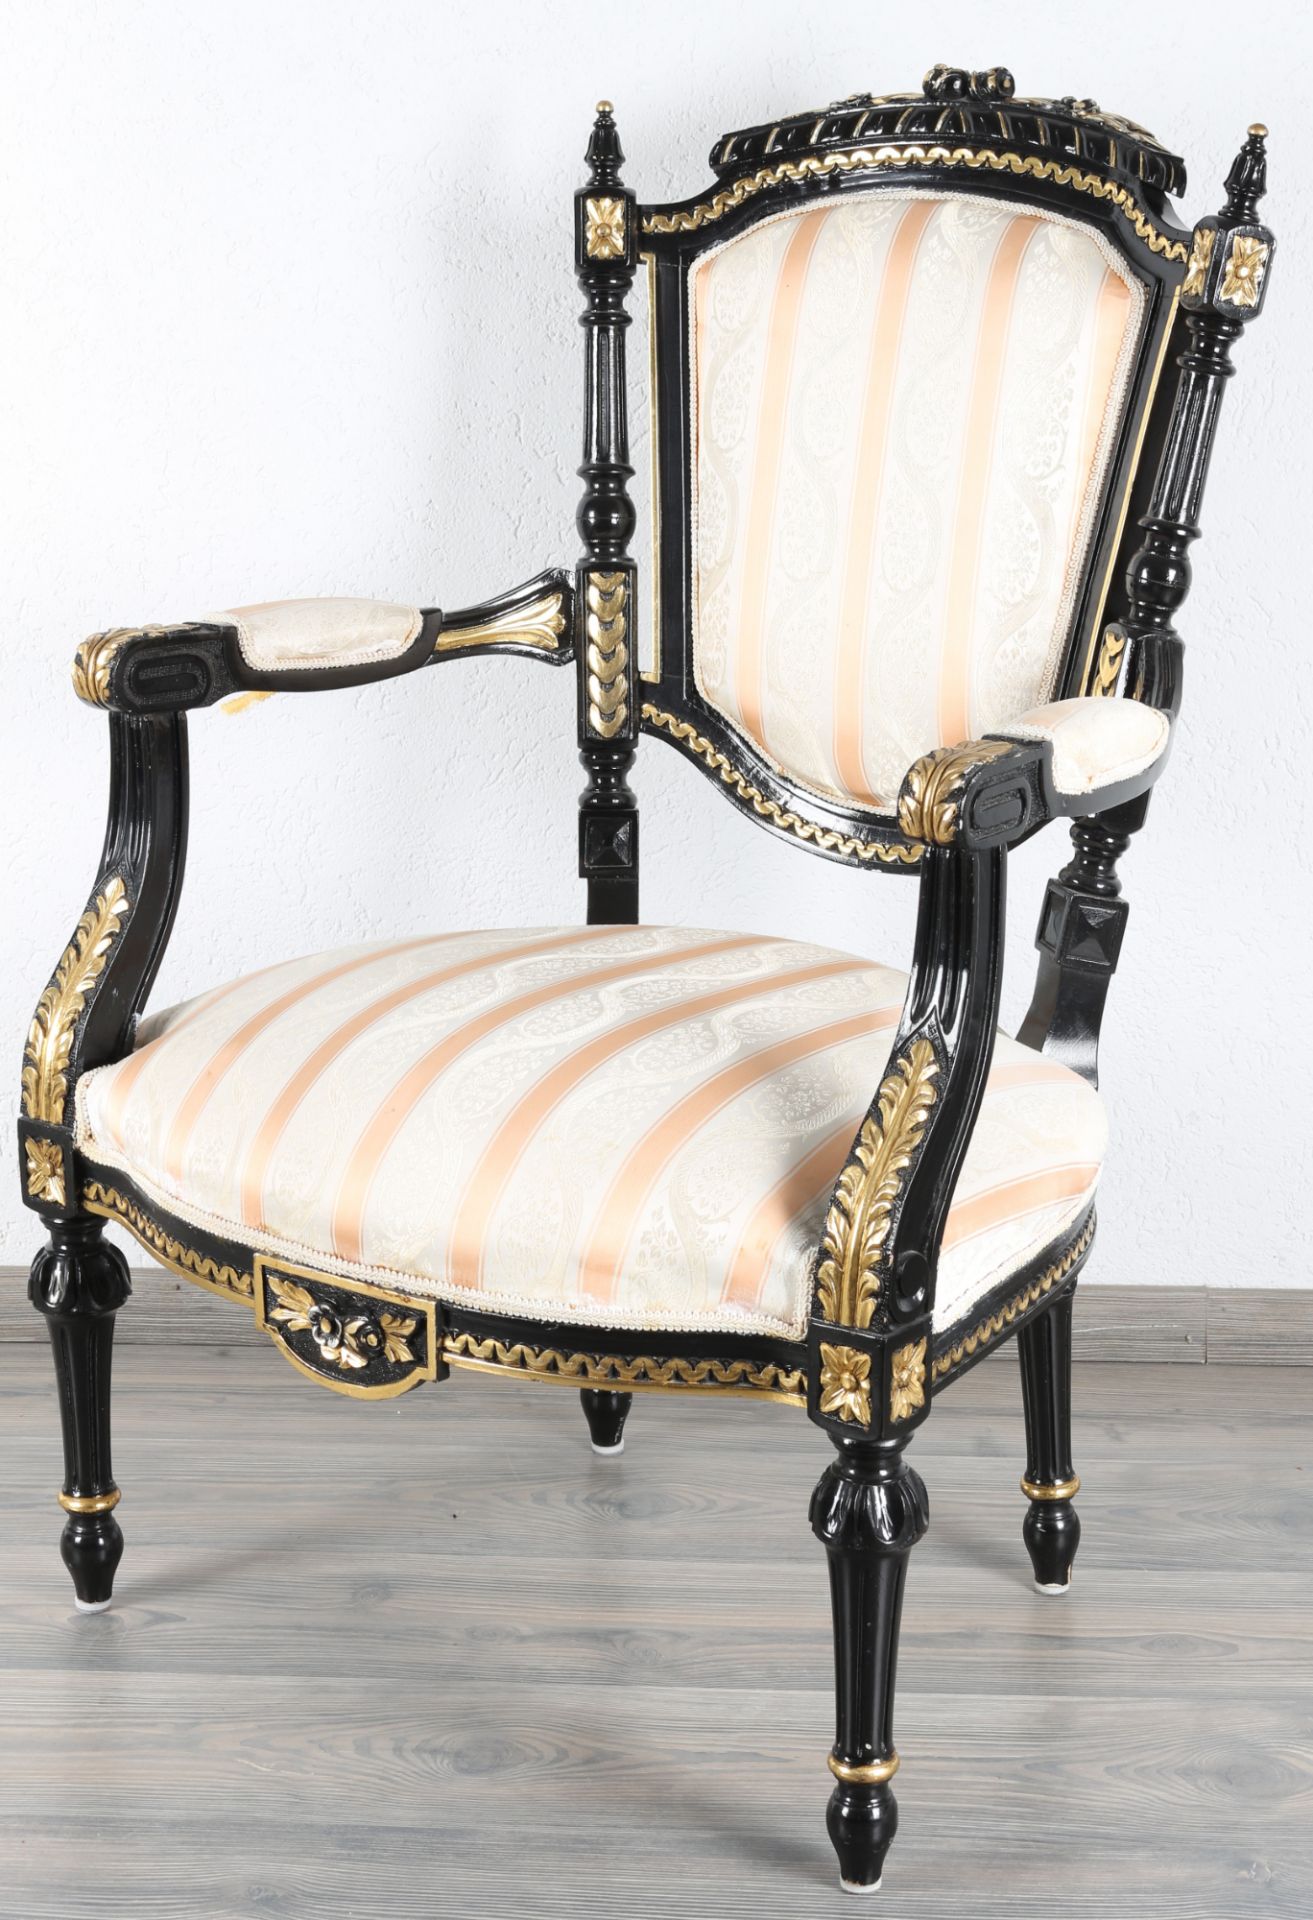 2 Sessel und 2 Stühle im Napoleon III - Stil, 2 armchairs and 2 chairs in Napoleon III style, - Image 2 of 5